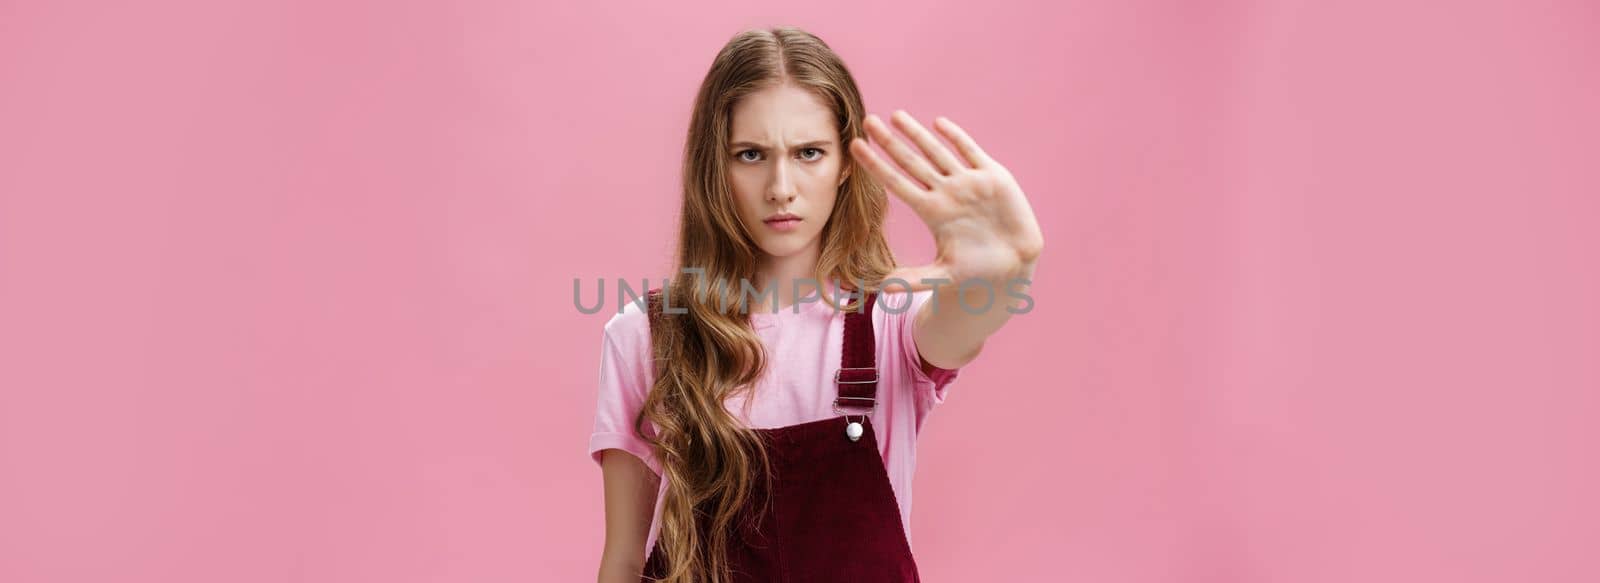 Woman protest against testing products on animals. Serious-looking confident young girl with long wavy hair frowning looking sctrict at camera pulling palm towards camera in prohibition and no gesture. Body language concept